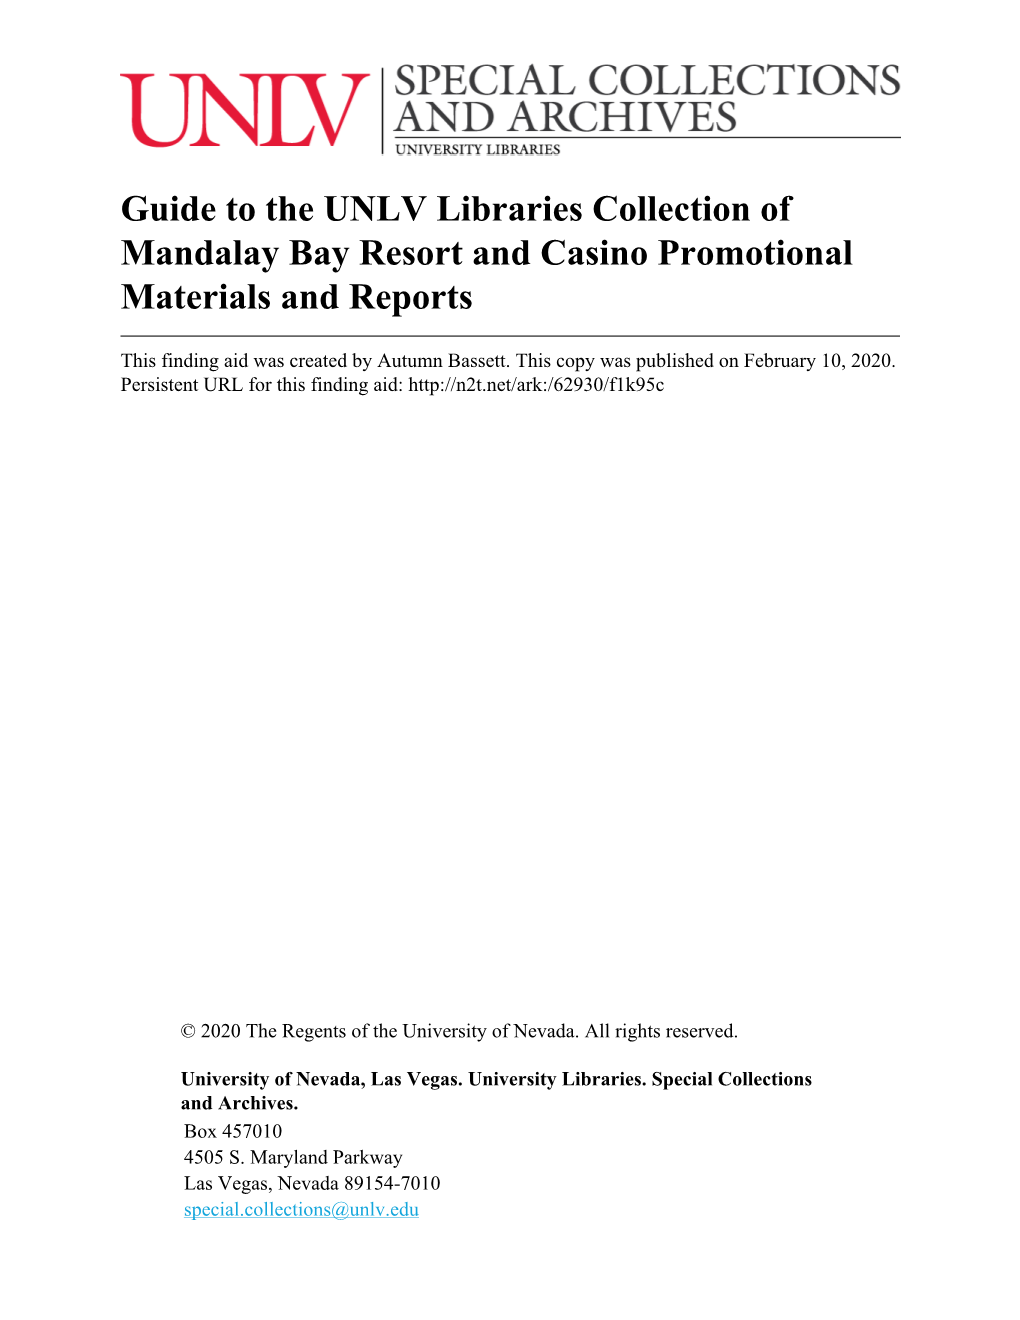 Guide to the UNLV Libraries Collection of Mandalay Bay Resort and Casino Promotional Materials and Reports